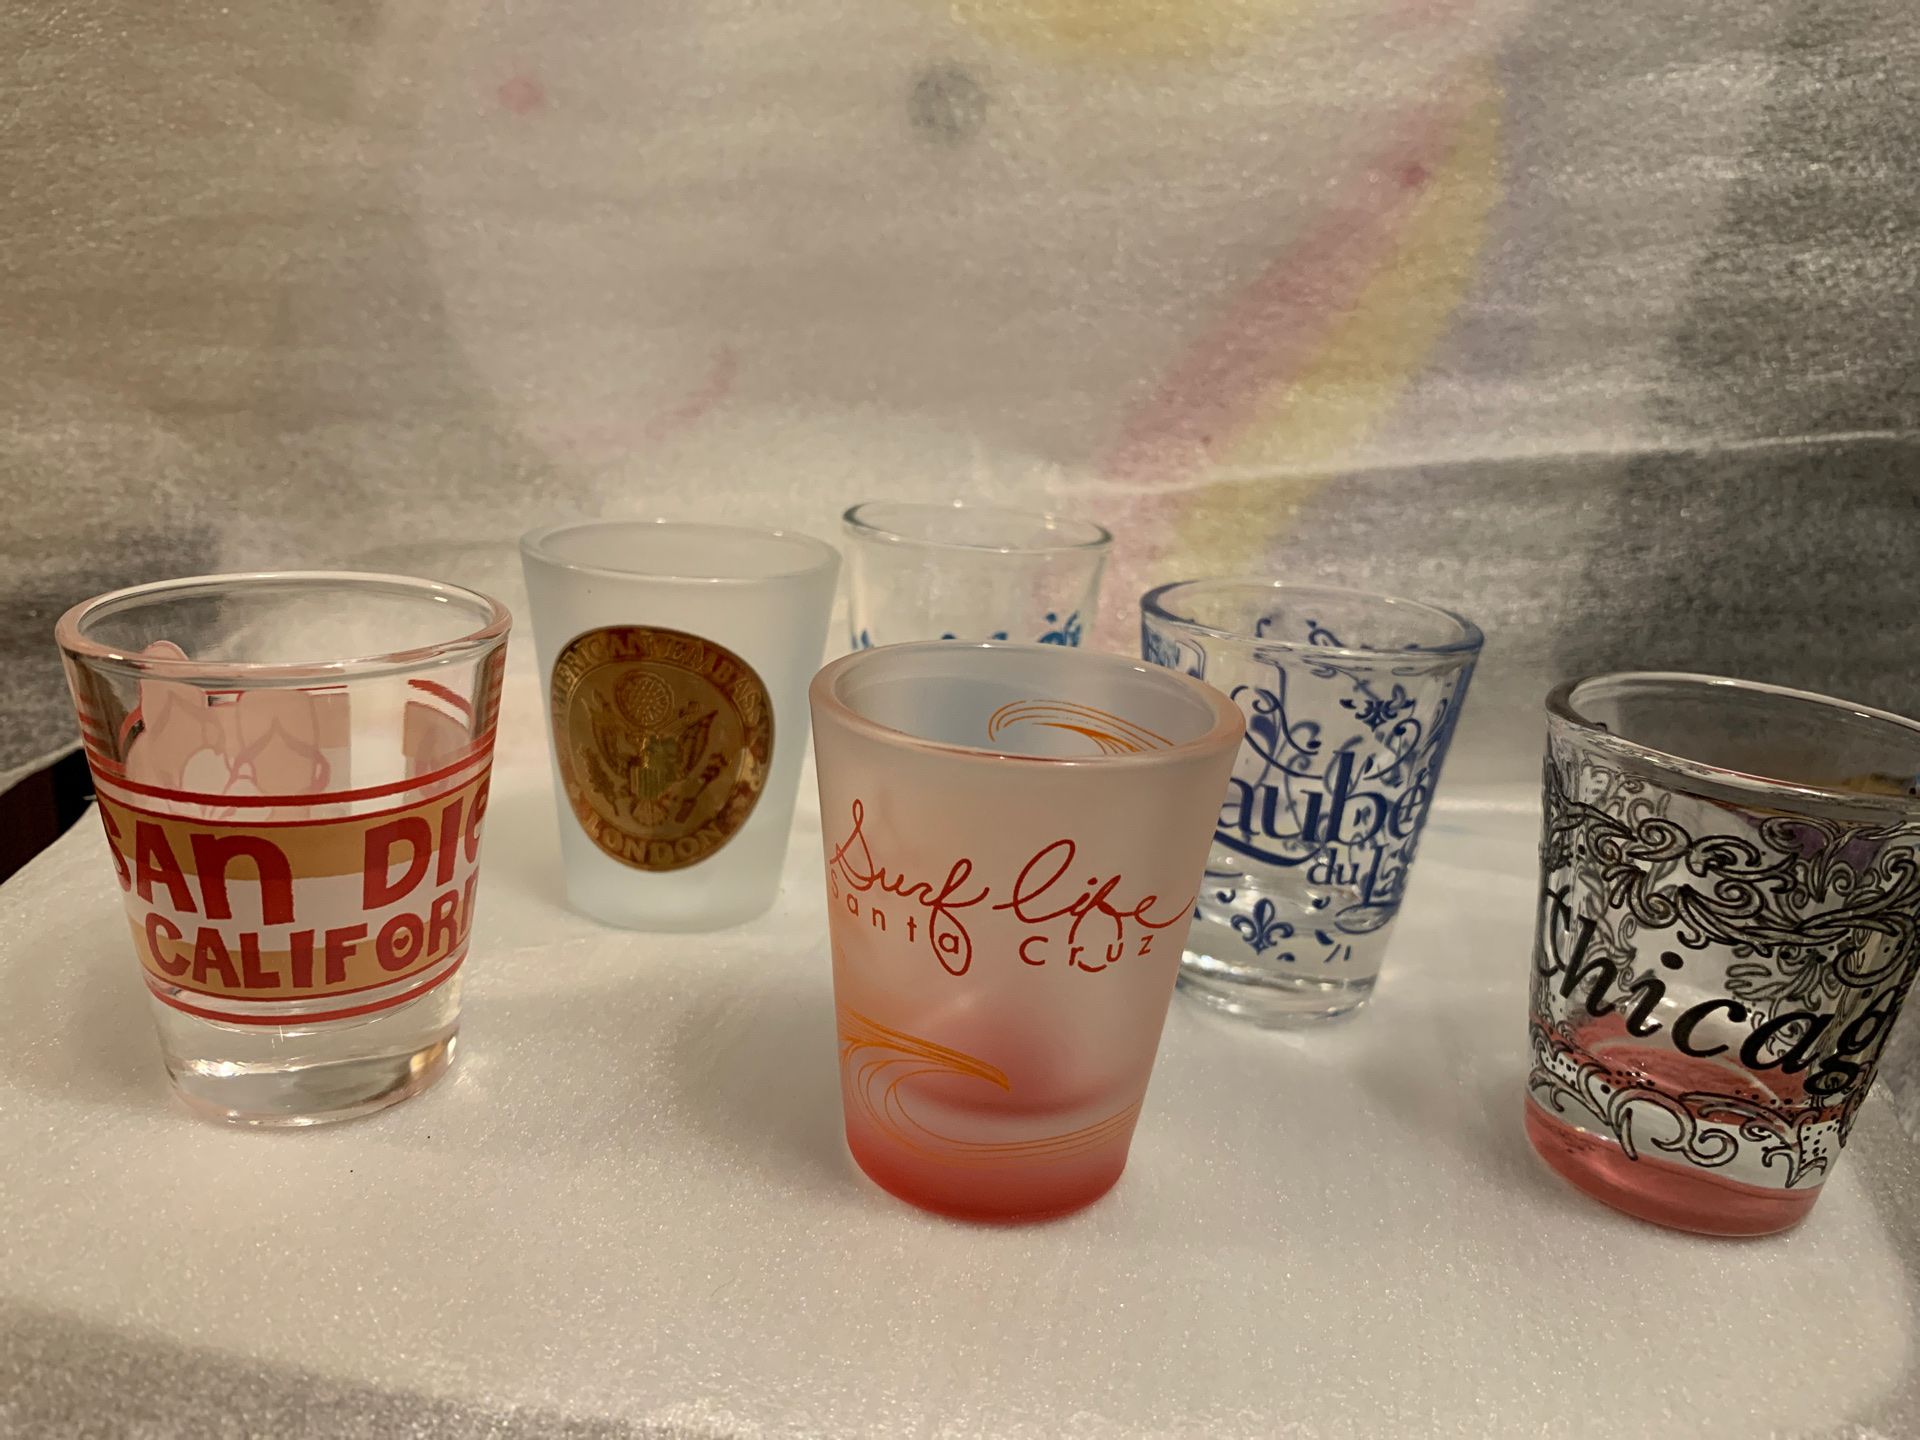 Collectible Shot Glasses/ SAN DiEGo CALIFORNIA/SURF CITY/CHICAGO/TROPICCANA LAS VEGAS/LAUBERGE/ du LAC/CHICAGO/AMERICAN EMBASSY LONDON ~ 6 CUPS for